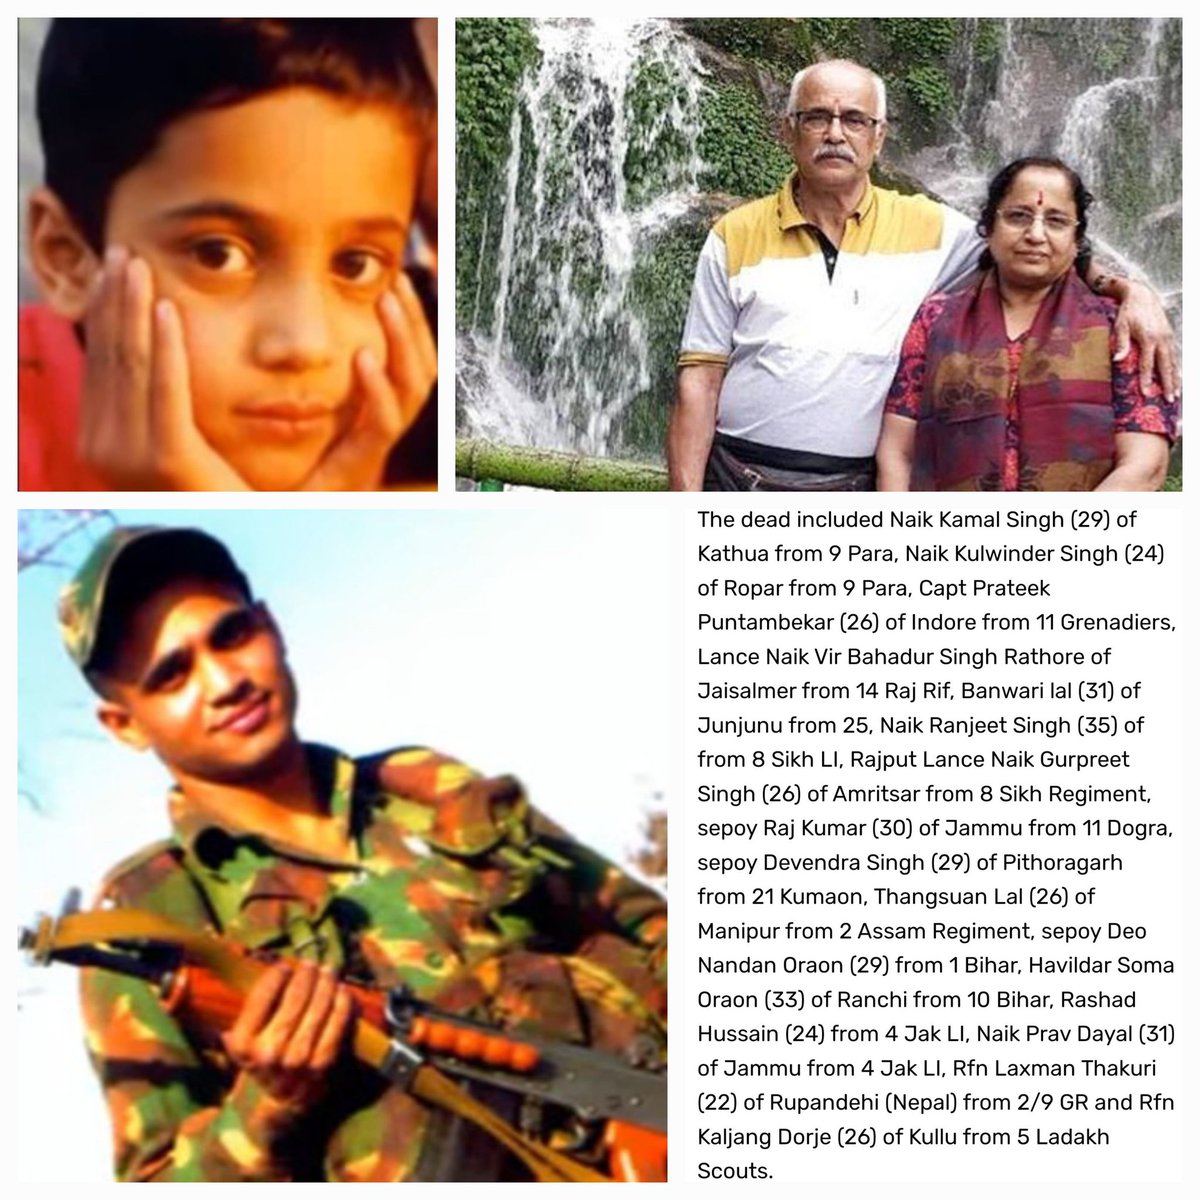 #BalidanDiwas #UnsungHeroes
Parents Shri Raveendra Puntambekar and Shubhada ji wanted their cute, bright son Prateek to do engineering.... but the call to serve our nation in uniform was way stronger 

After NDA, IMA and Commission in 11 Grenadiers in 2007, Lt Prateek Puntambekar…